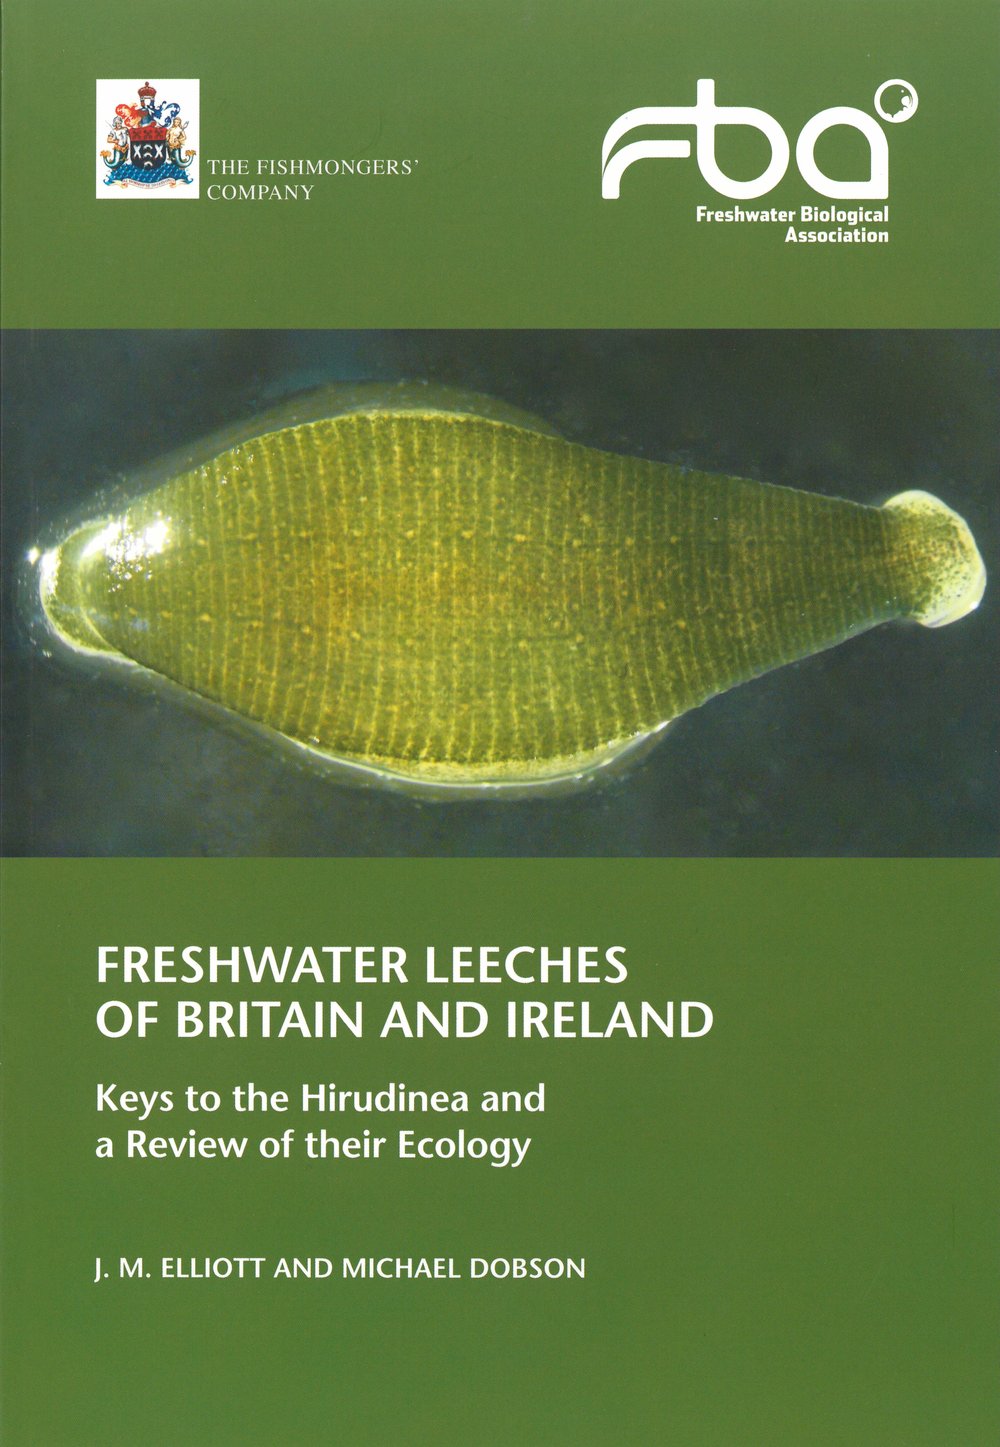 Freshwater Leeches of Britain and Ireland SP69 — Freshwater Biological  Association